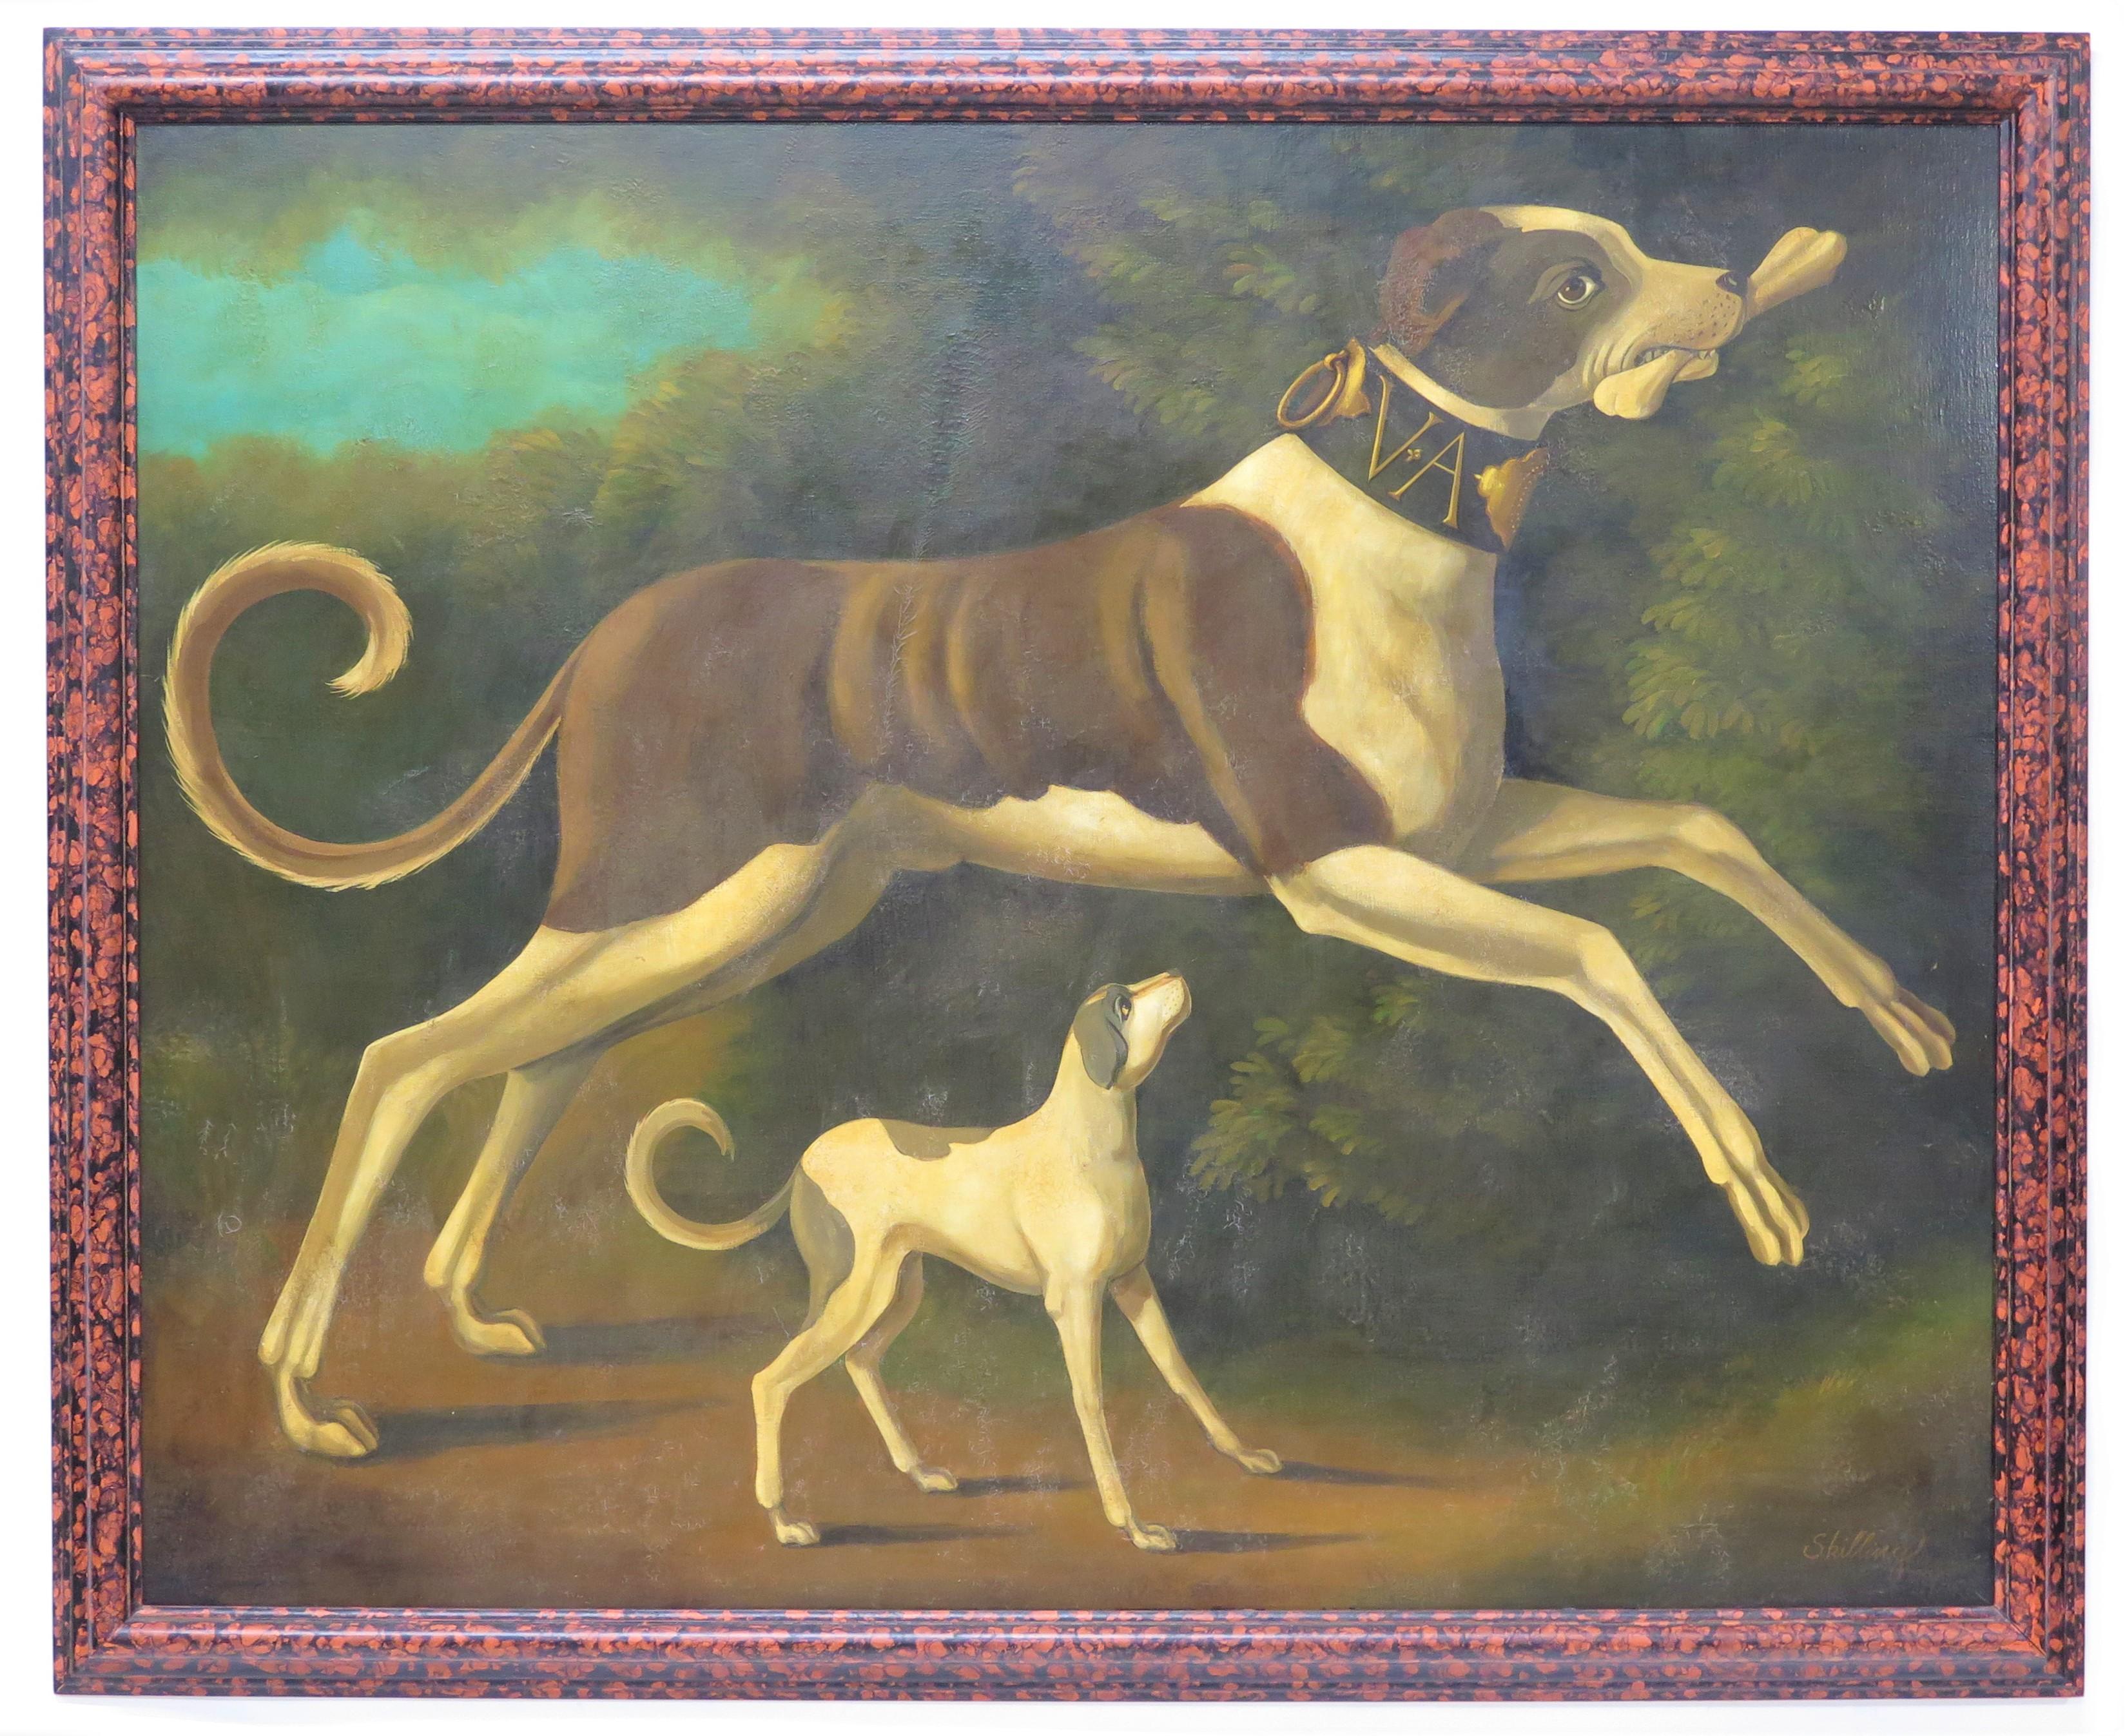 oil painting on canvas of two playful dogs in mid frolic and executed in a tongue in cheek Victorian parlor painting style with contrived aging, distressed finish, and a faux tortoise frame, signed Skilling in the lower right.